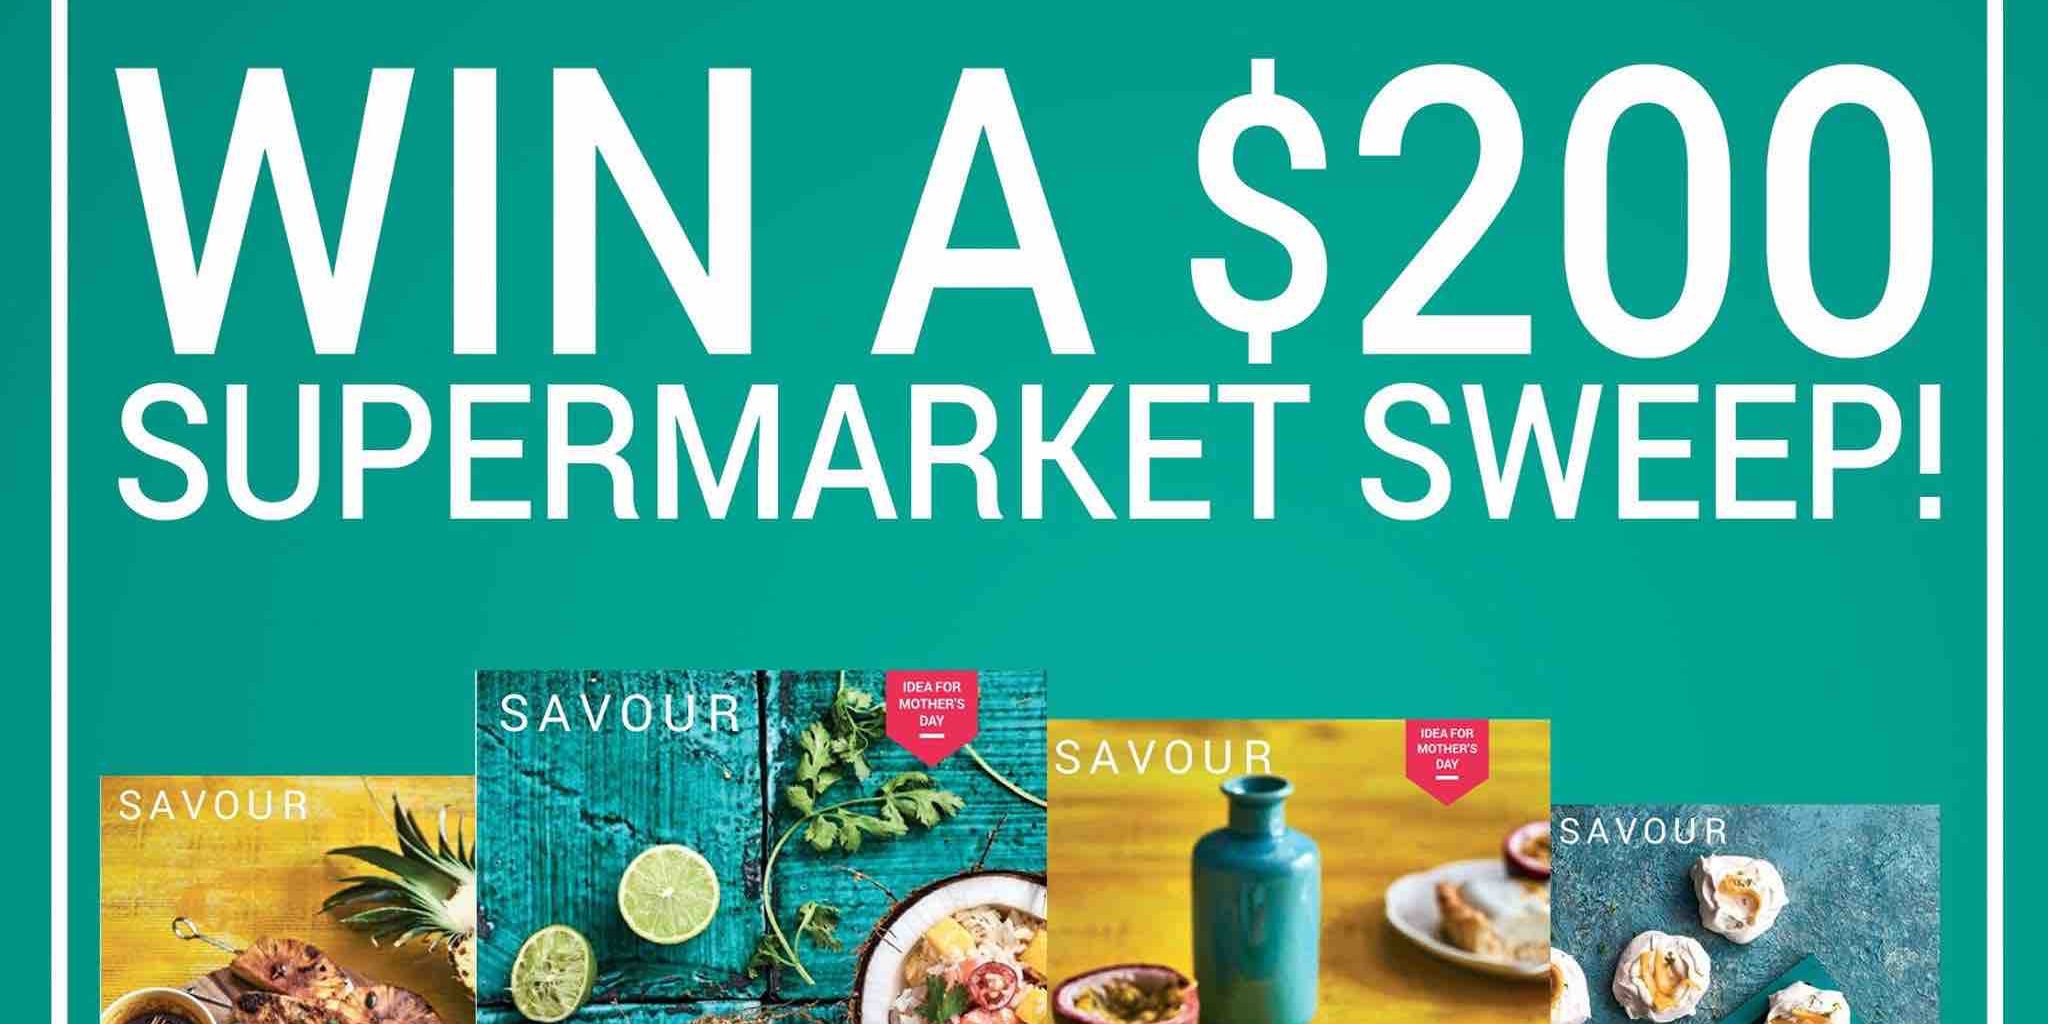 Cold Storage Singapore Win A $200 Supermarket Sweep Contest ends 30 Jun 2017